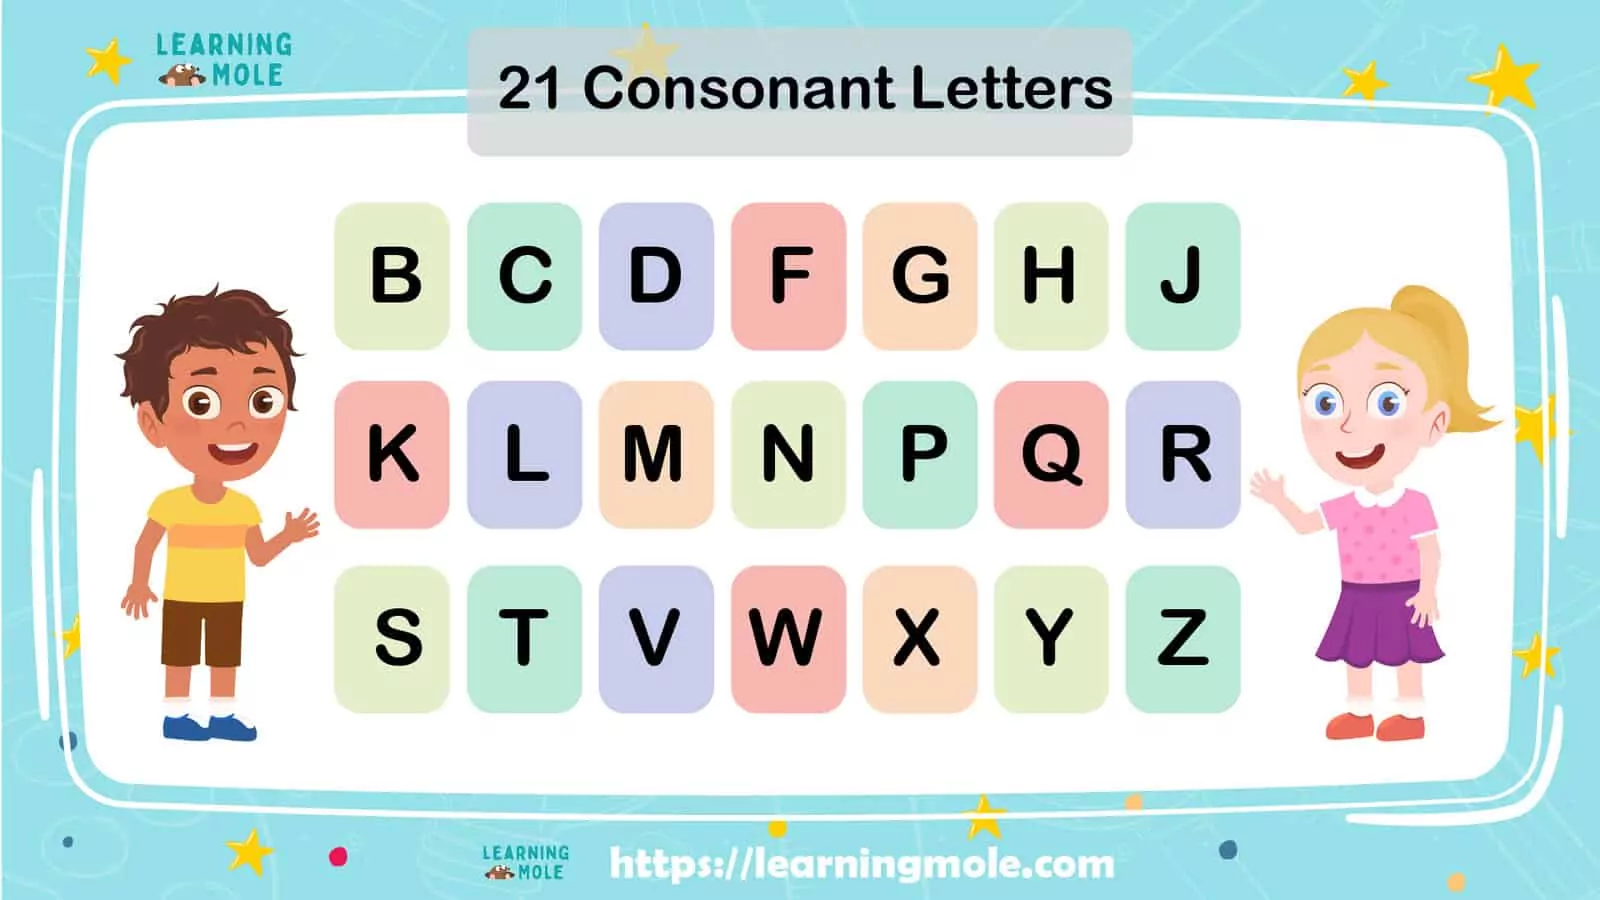 Consonants and Vowels,What is a vowel?,Monophtong,Diphthong,Long and short vowel sounds,Consonants,Consonant Digraphs,Consonant Blends,Consonant Clusters,What Do You Know about Place and Manner of Articulation of Consonants and Vowels?,Some Fun Activities For Learning Vowels and Consonants LearningMole